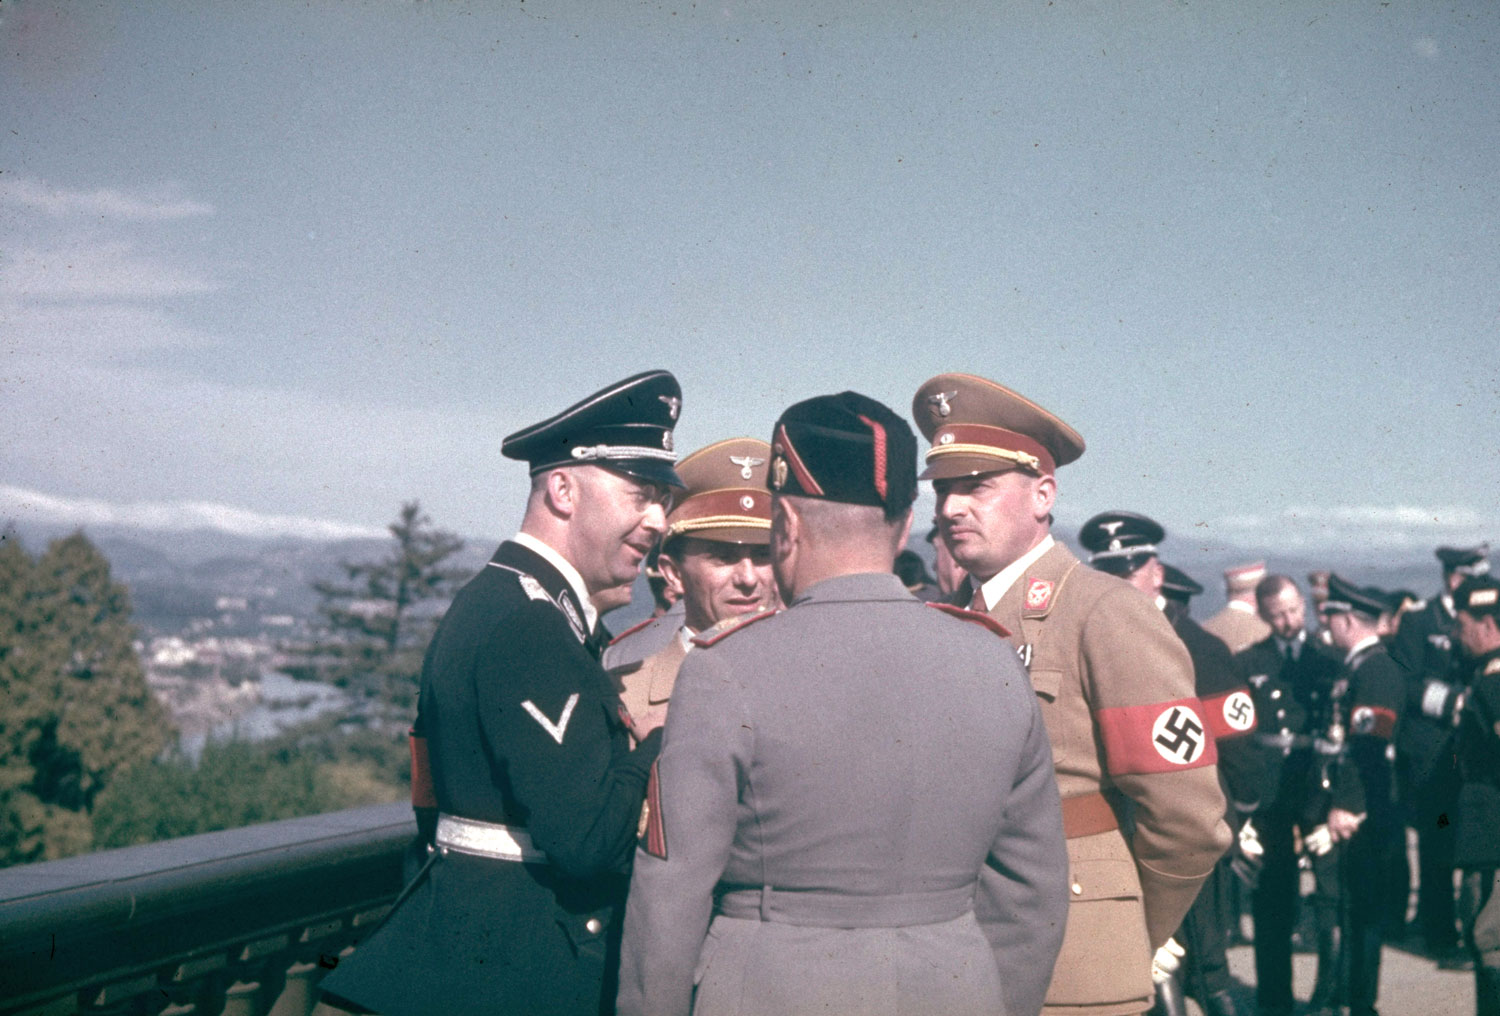 High-ranking Nazi and Italian Fascist officials, including Heinrich Himmler (left) and Mussolini (back to camera), at Santa Marinella, north of Rome, during Adolf Hitler's 1938 state visit to Italy.